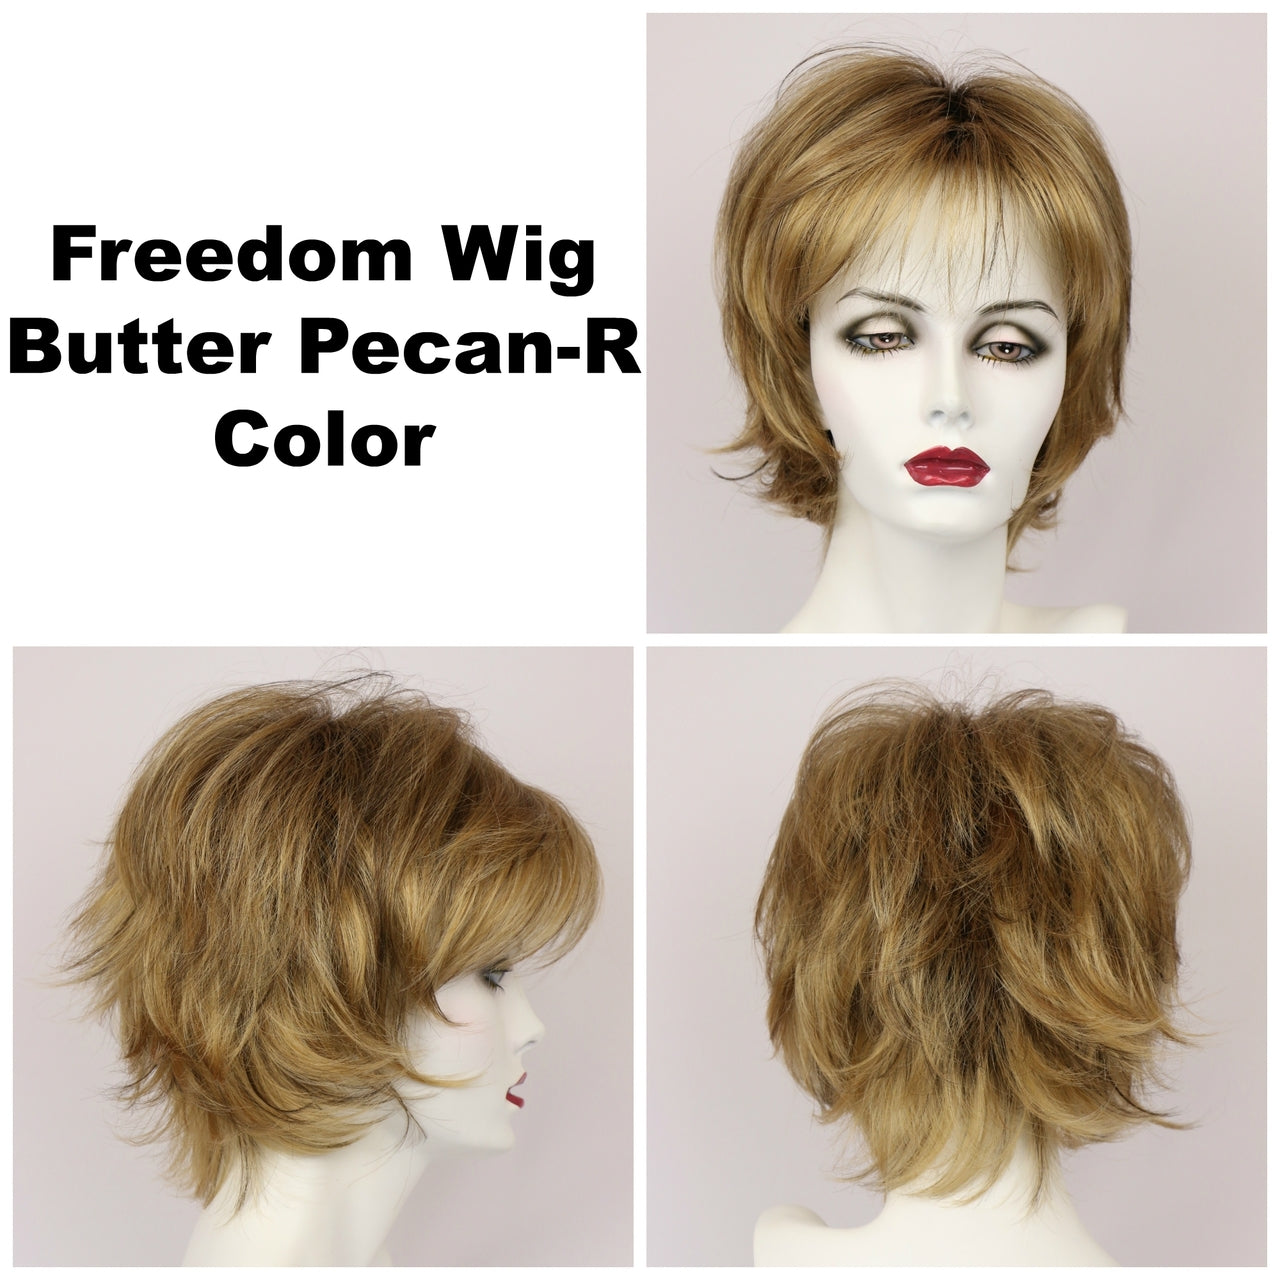 Butter Pecan-R / Freedom w/ Roots / Medium Wig